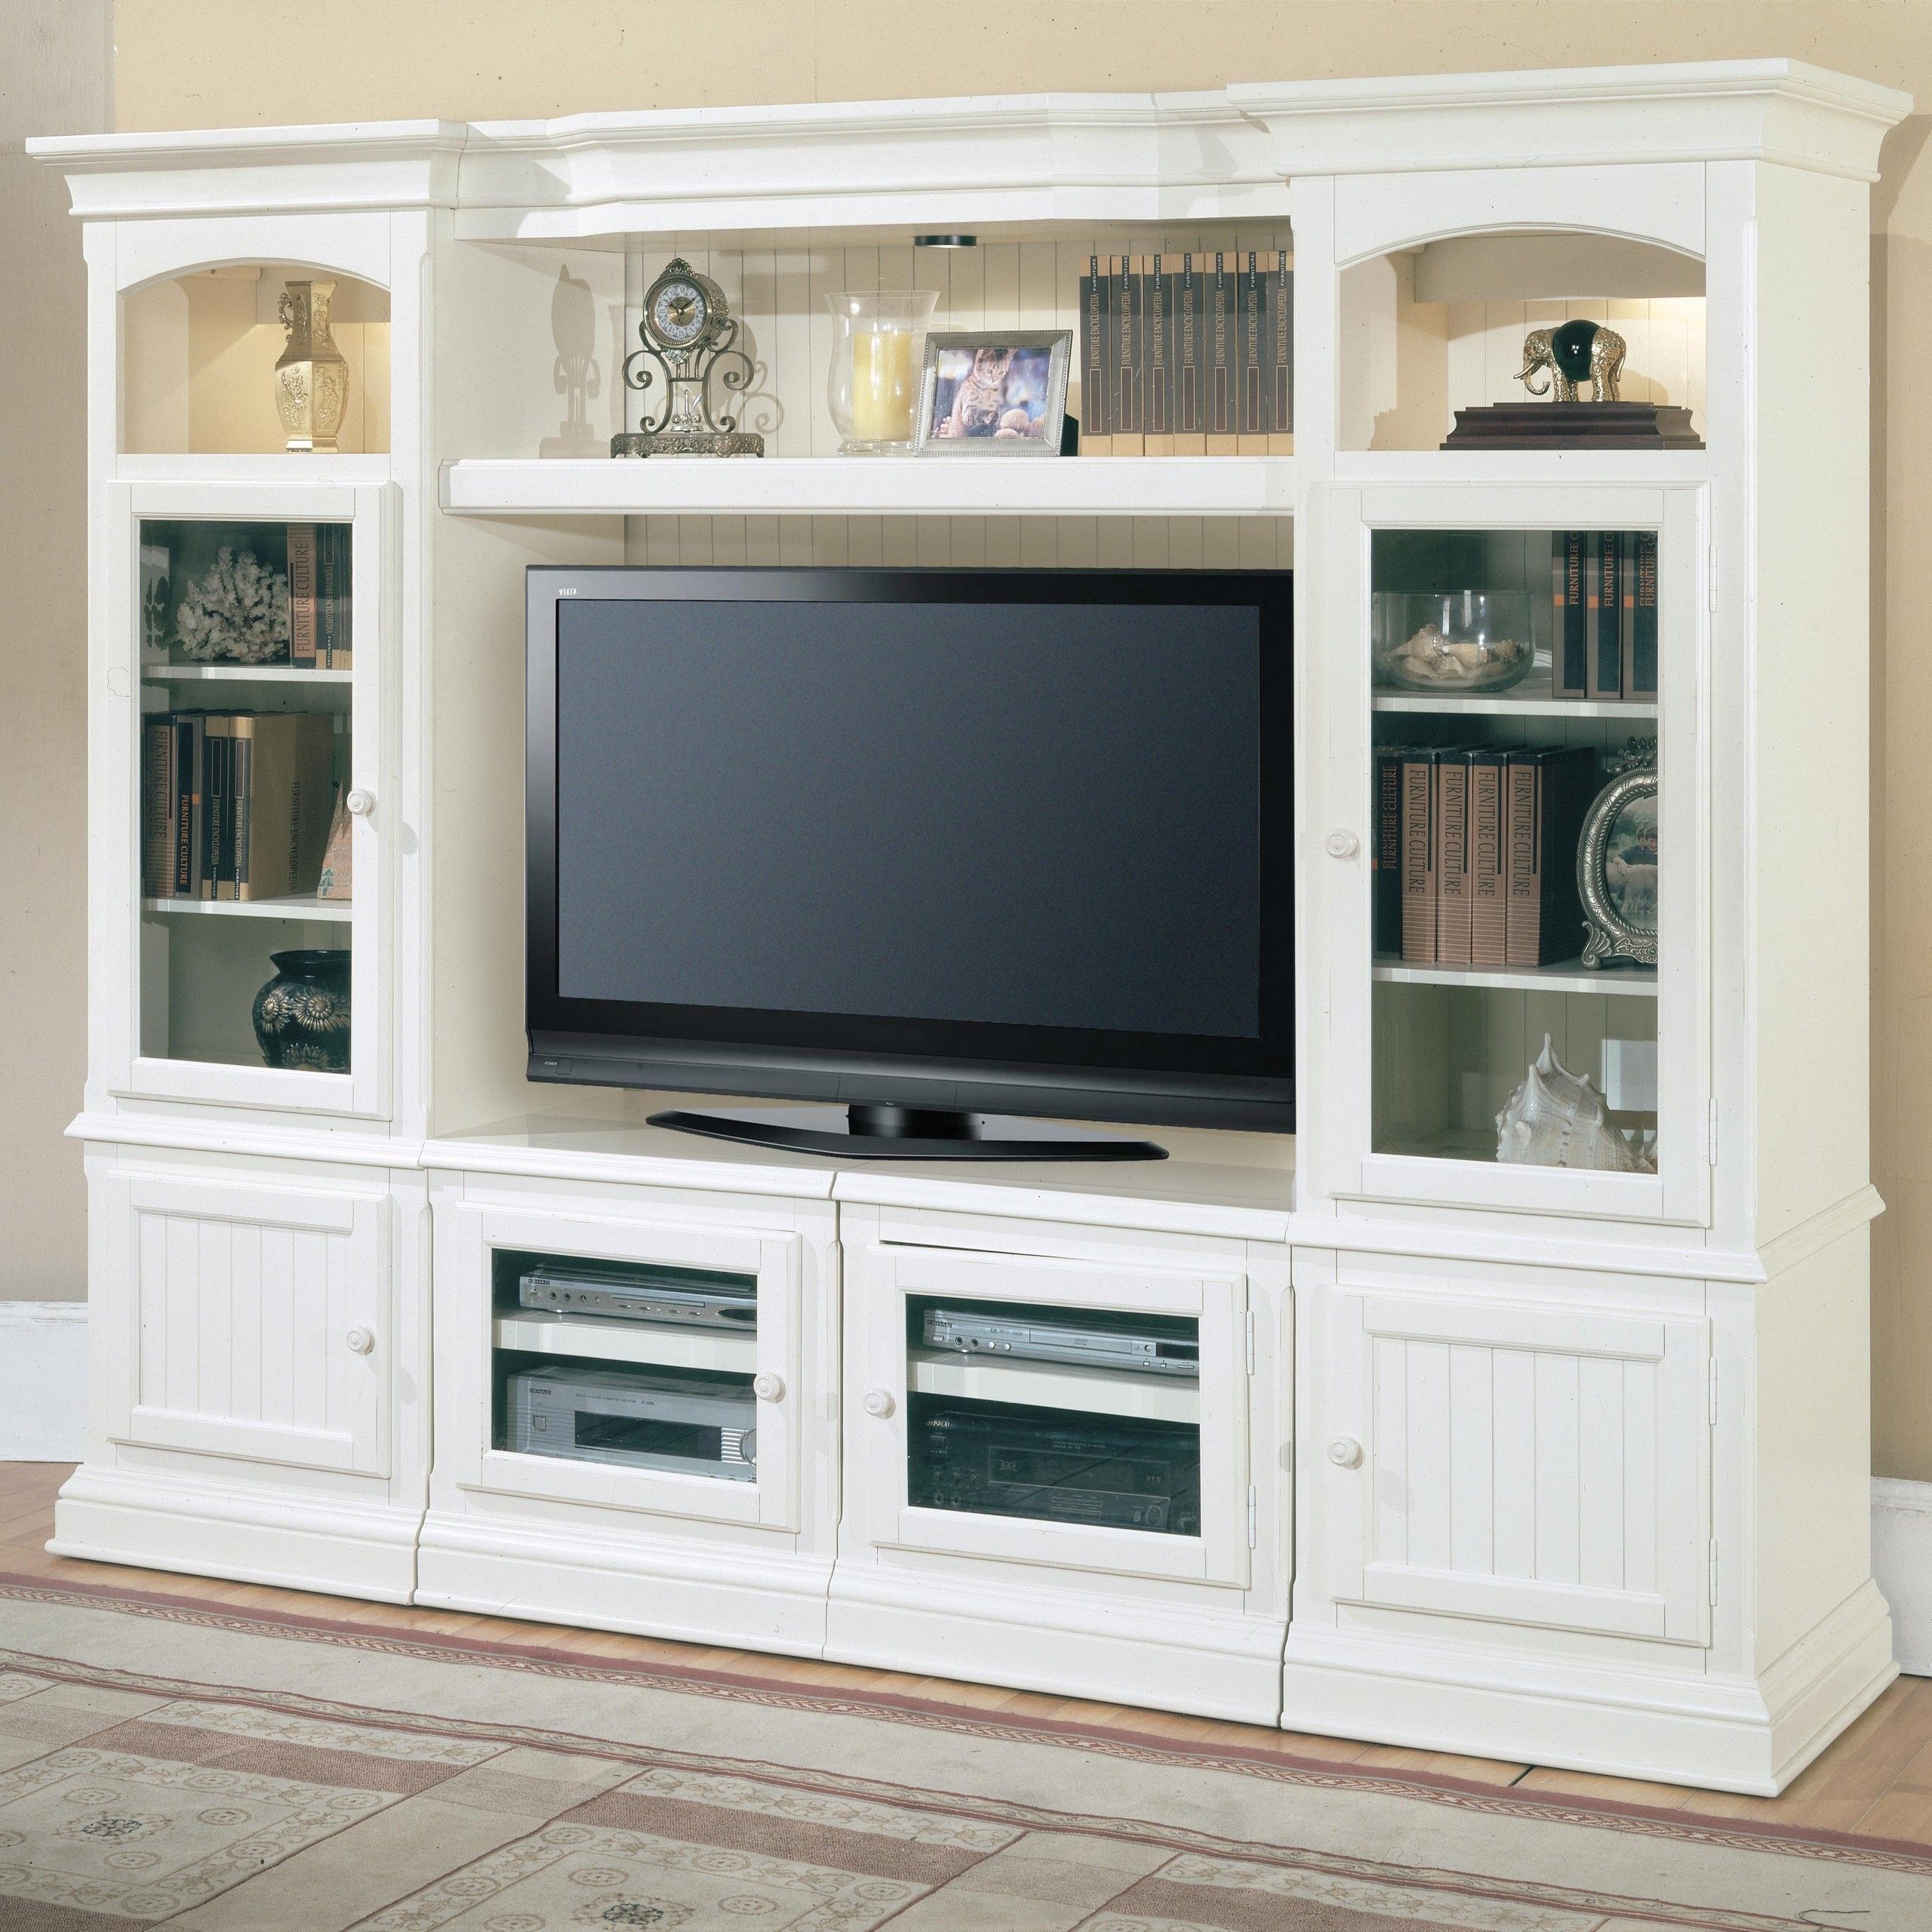 Traditional Entertainment Wall Units – Ideas On Foter In Entertainment Units With Bridge (Gallery 15 of 20)